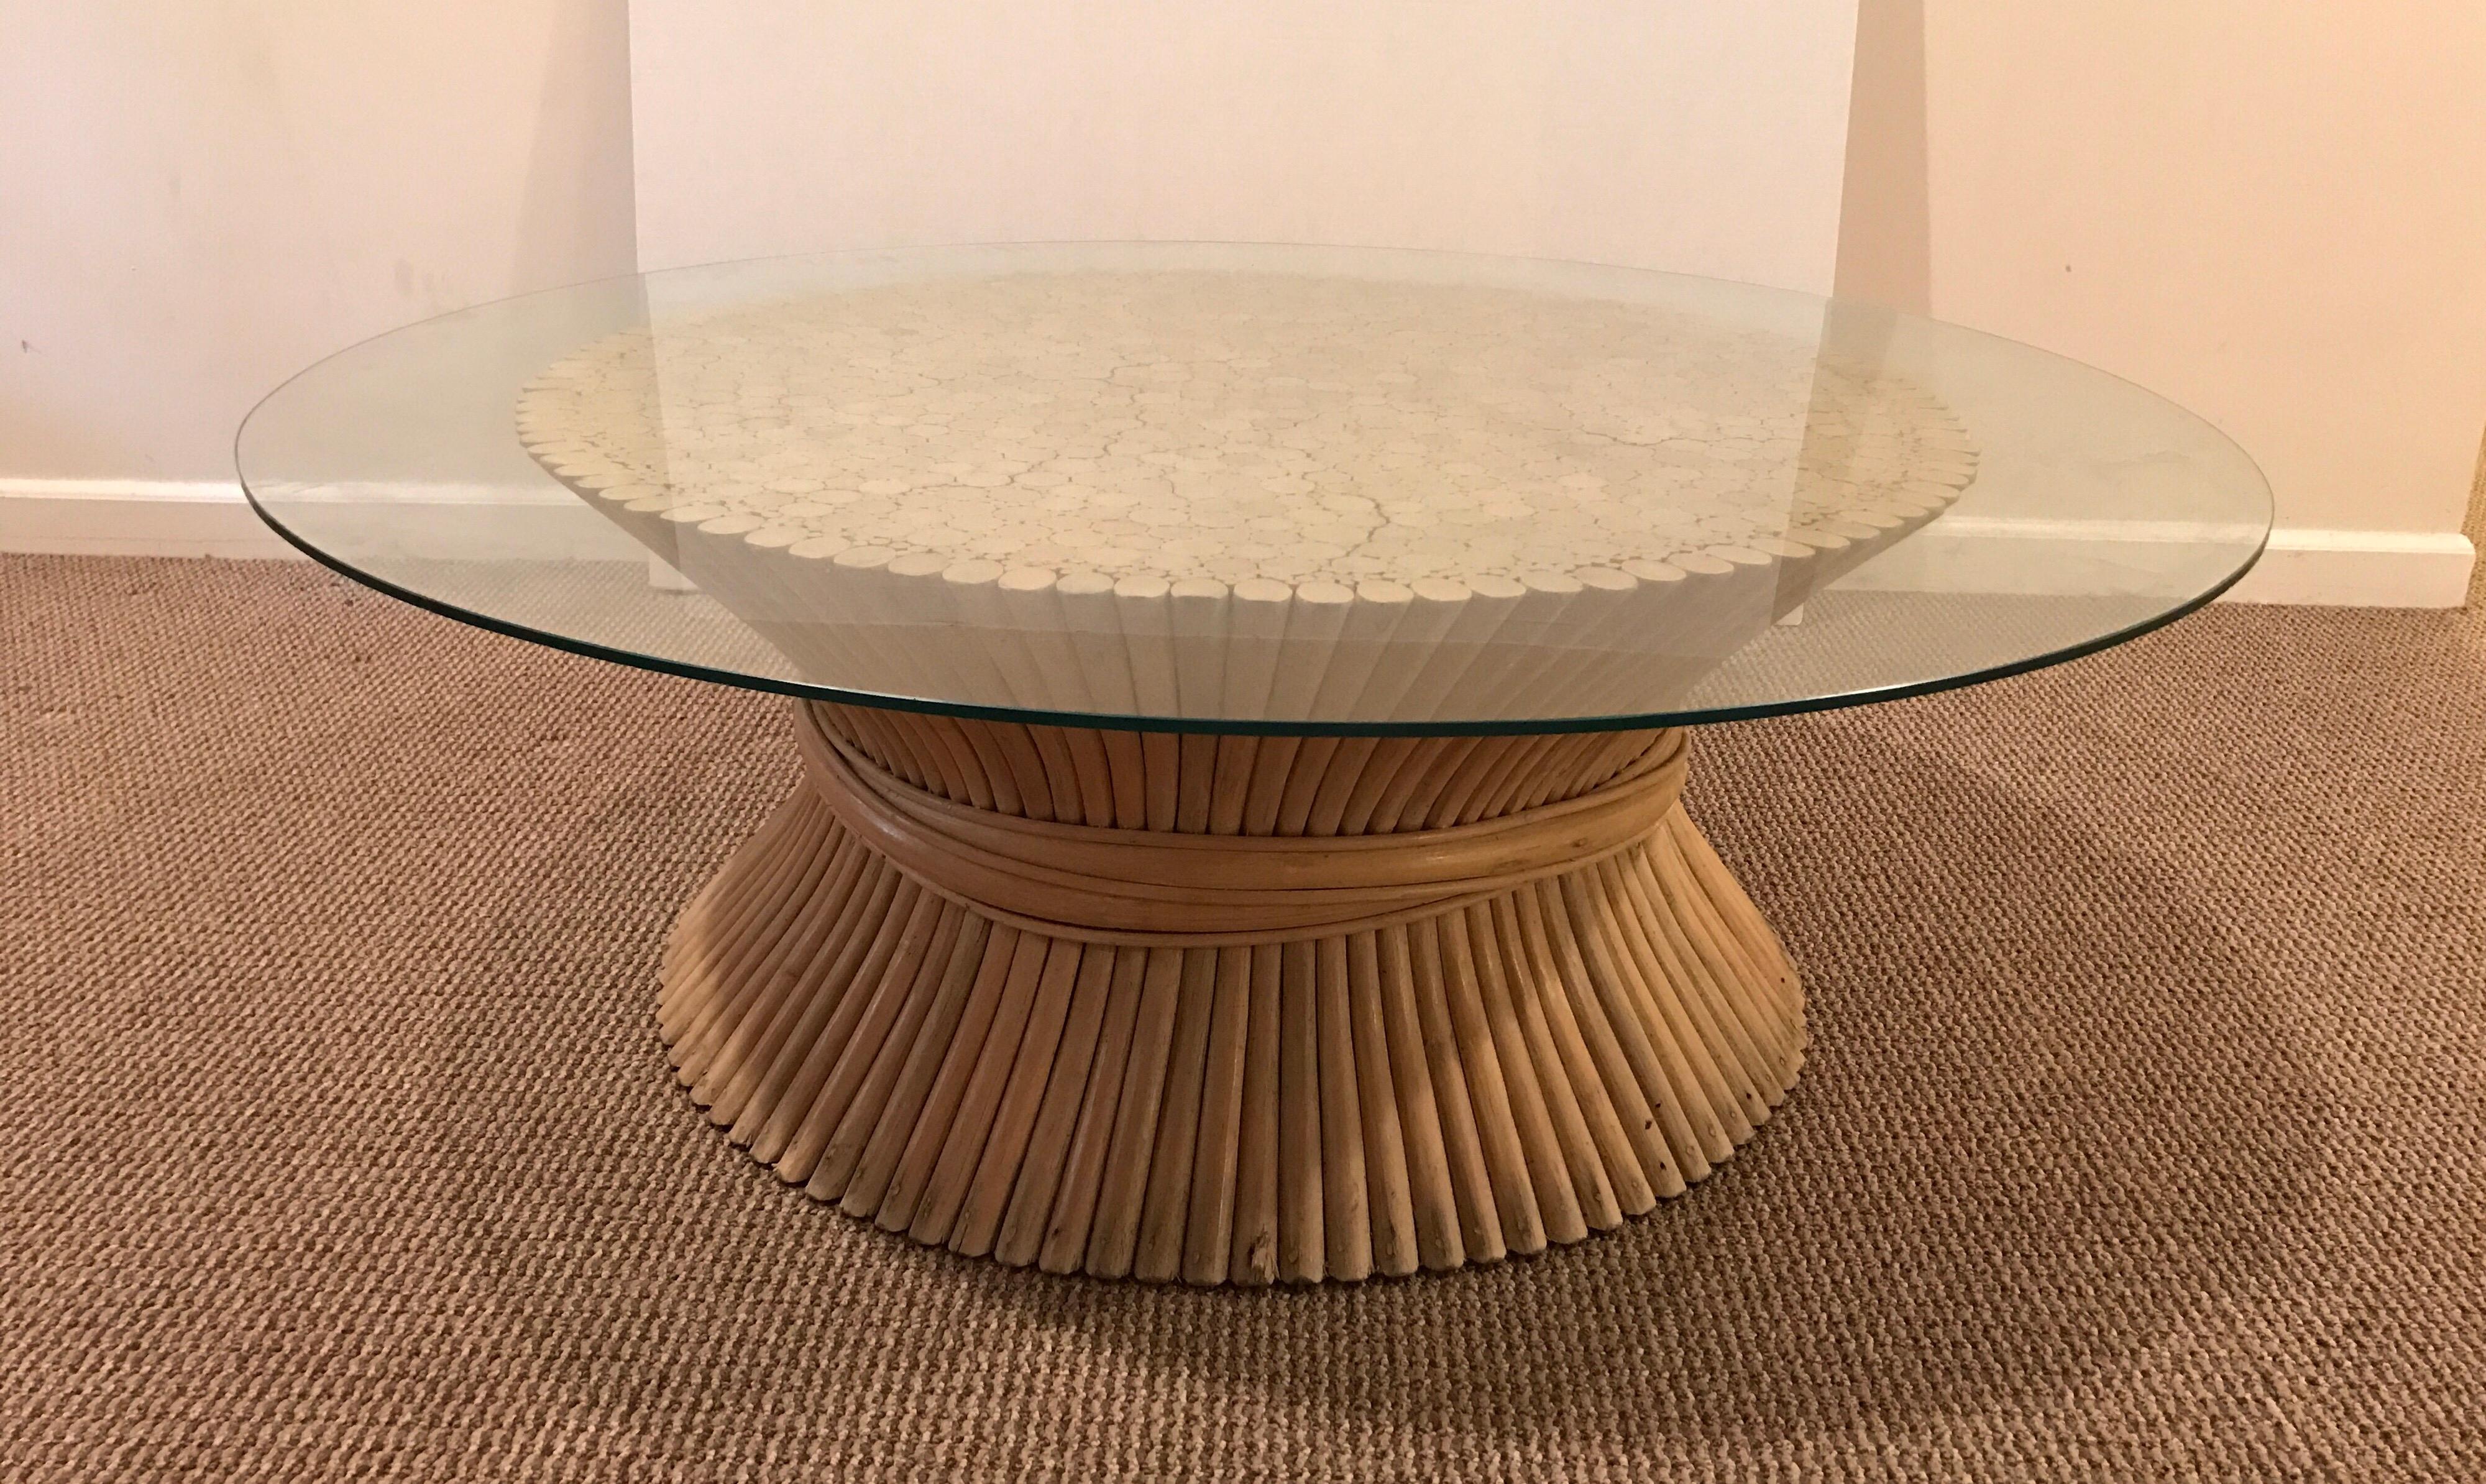 Designers John and Elinor McGuire used bamboo reeds to create this bundled wheat sheaf table. It measures 36” wide x 16” high and has a 3/8” thick x 48” wide glass top.
  